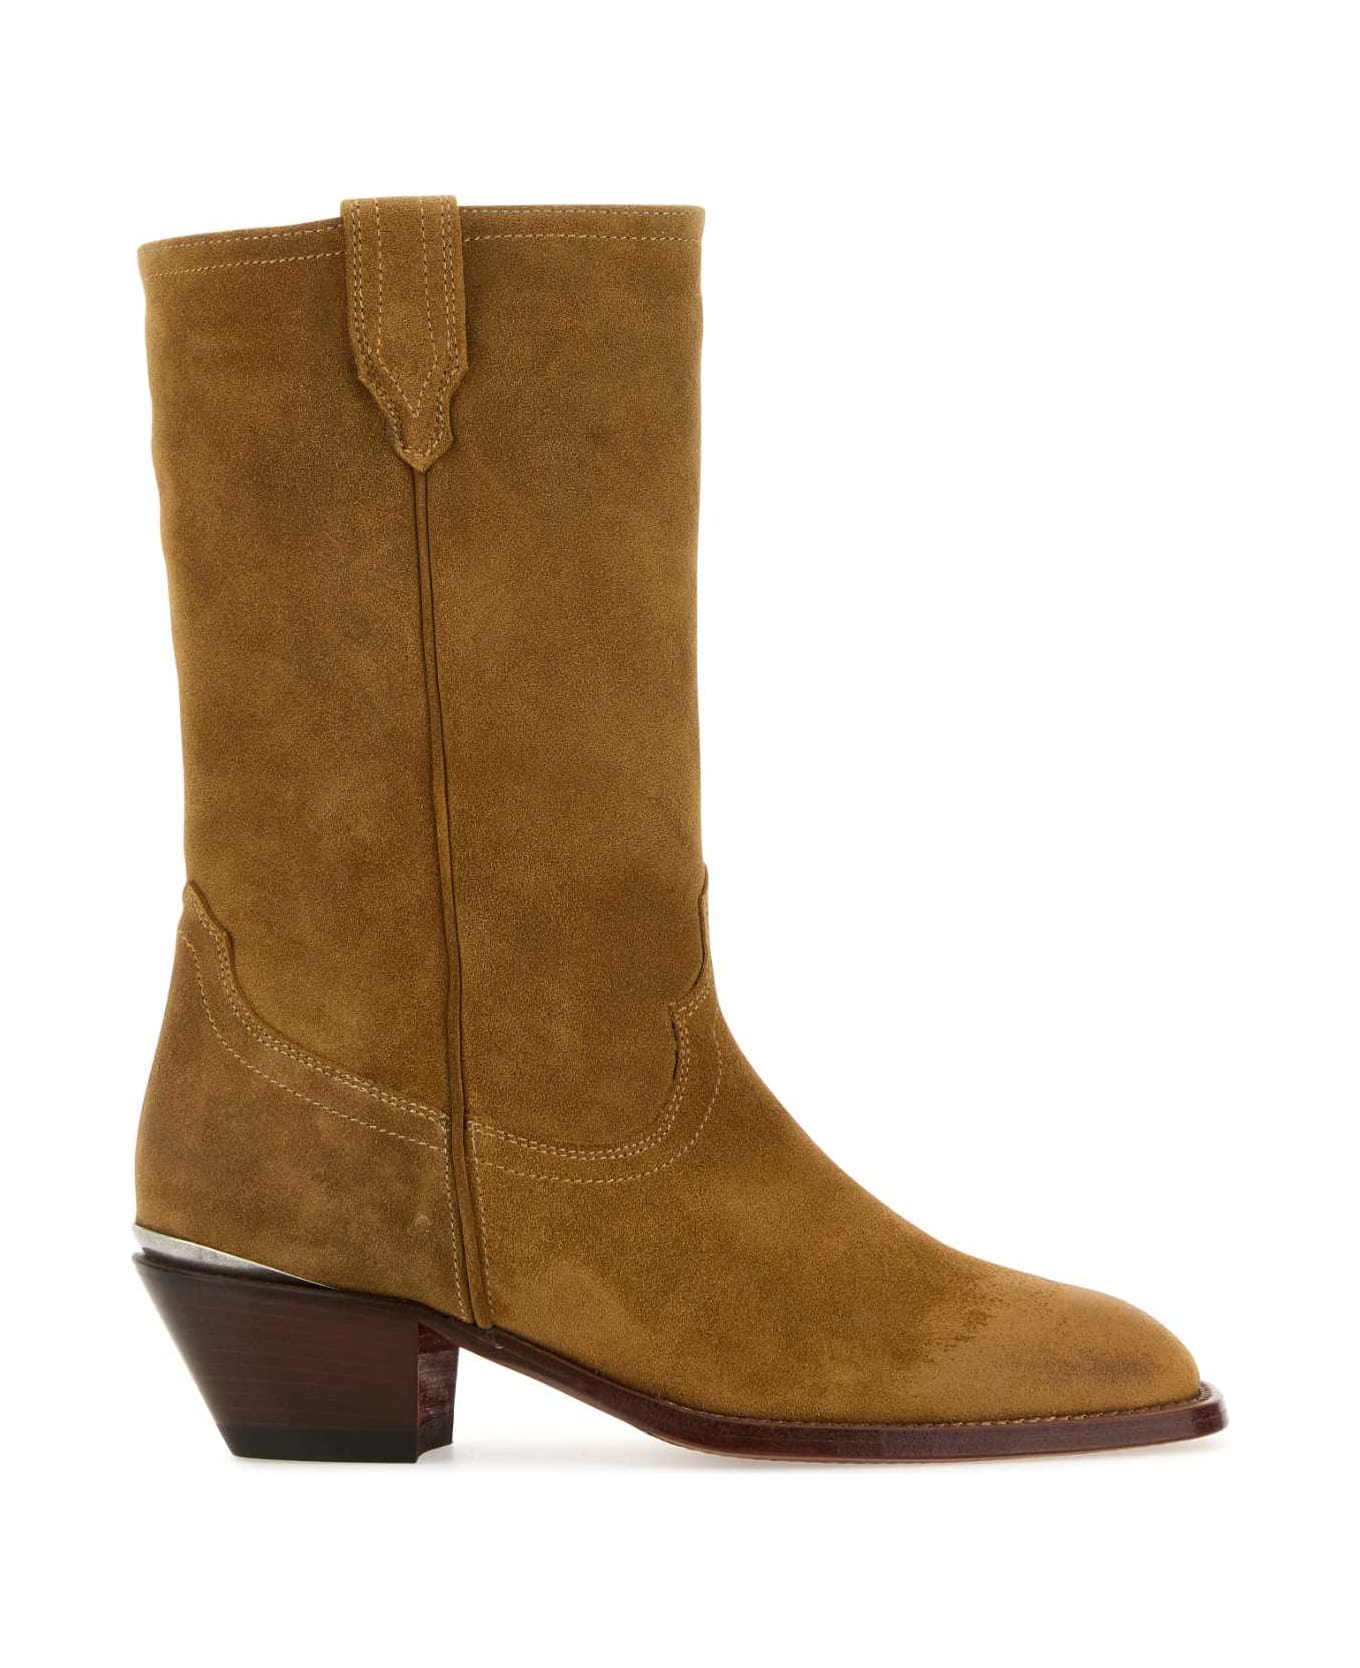 Sonora Camel Suede Durango Ankle Boots - CAMEL